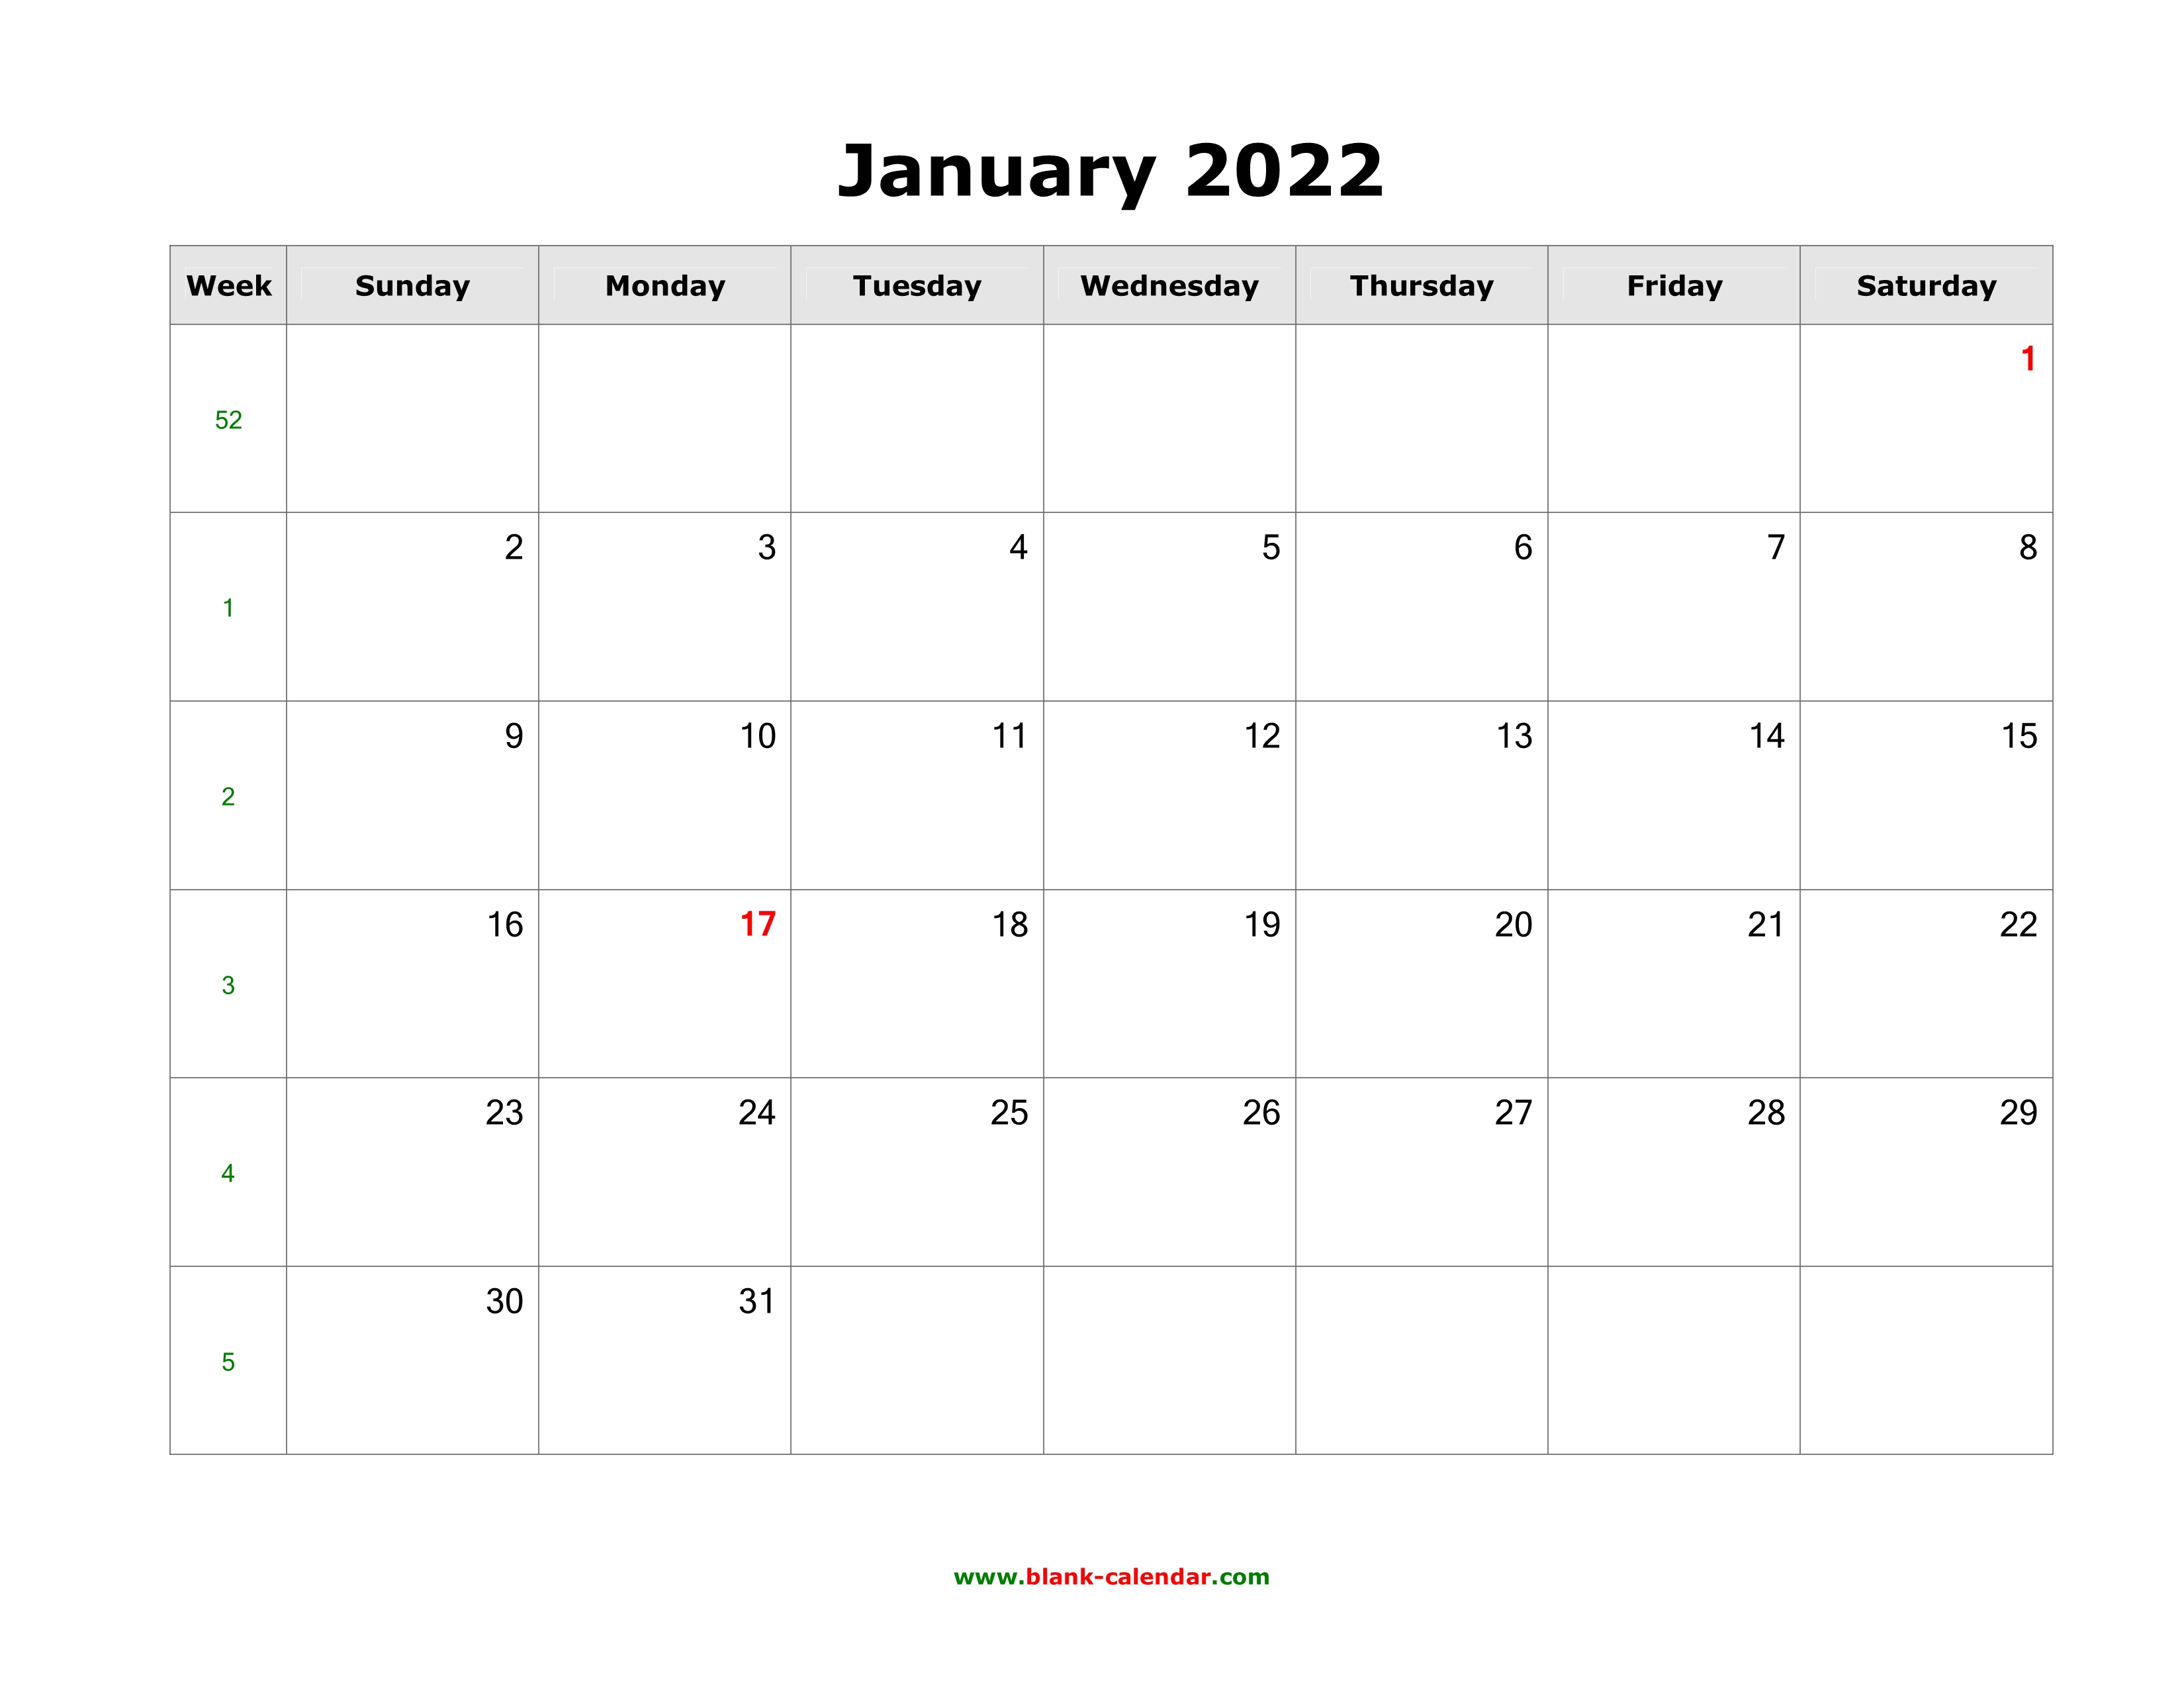 Monthly Blank Calendar 2022 Download Blank Calendar 2022 (12 Pages, One Month Per Page, Horizontal)